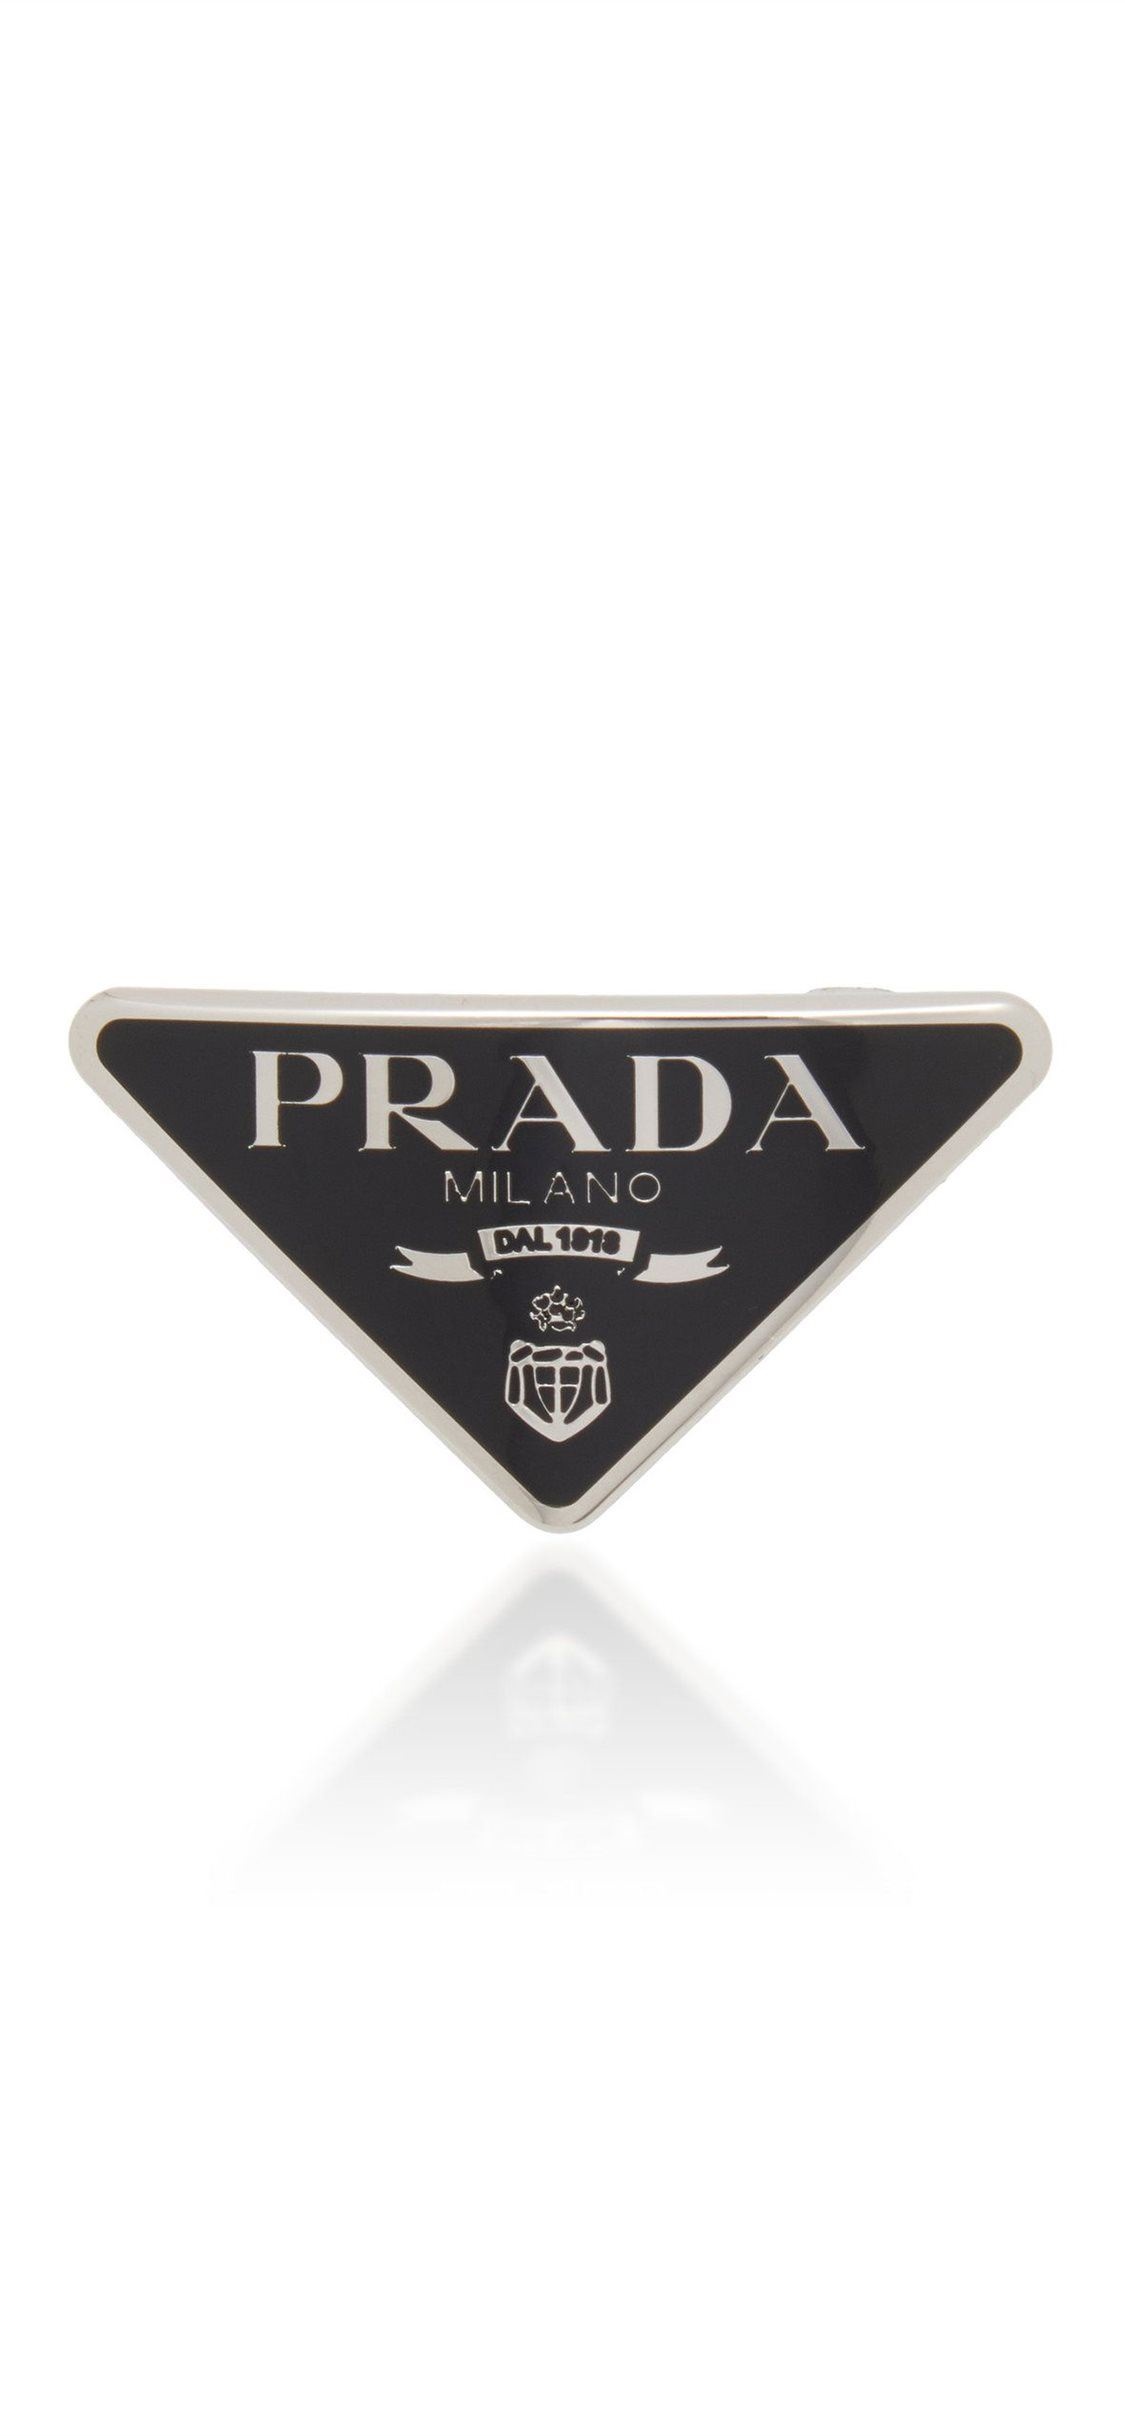 Prada: The family business, Manufacture and distribution of luxury goods, Logo. 1130x2440 HD Background.